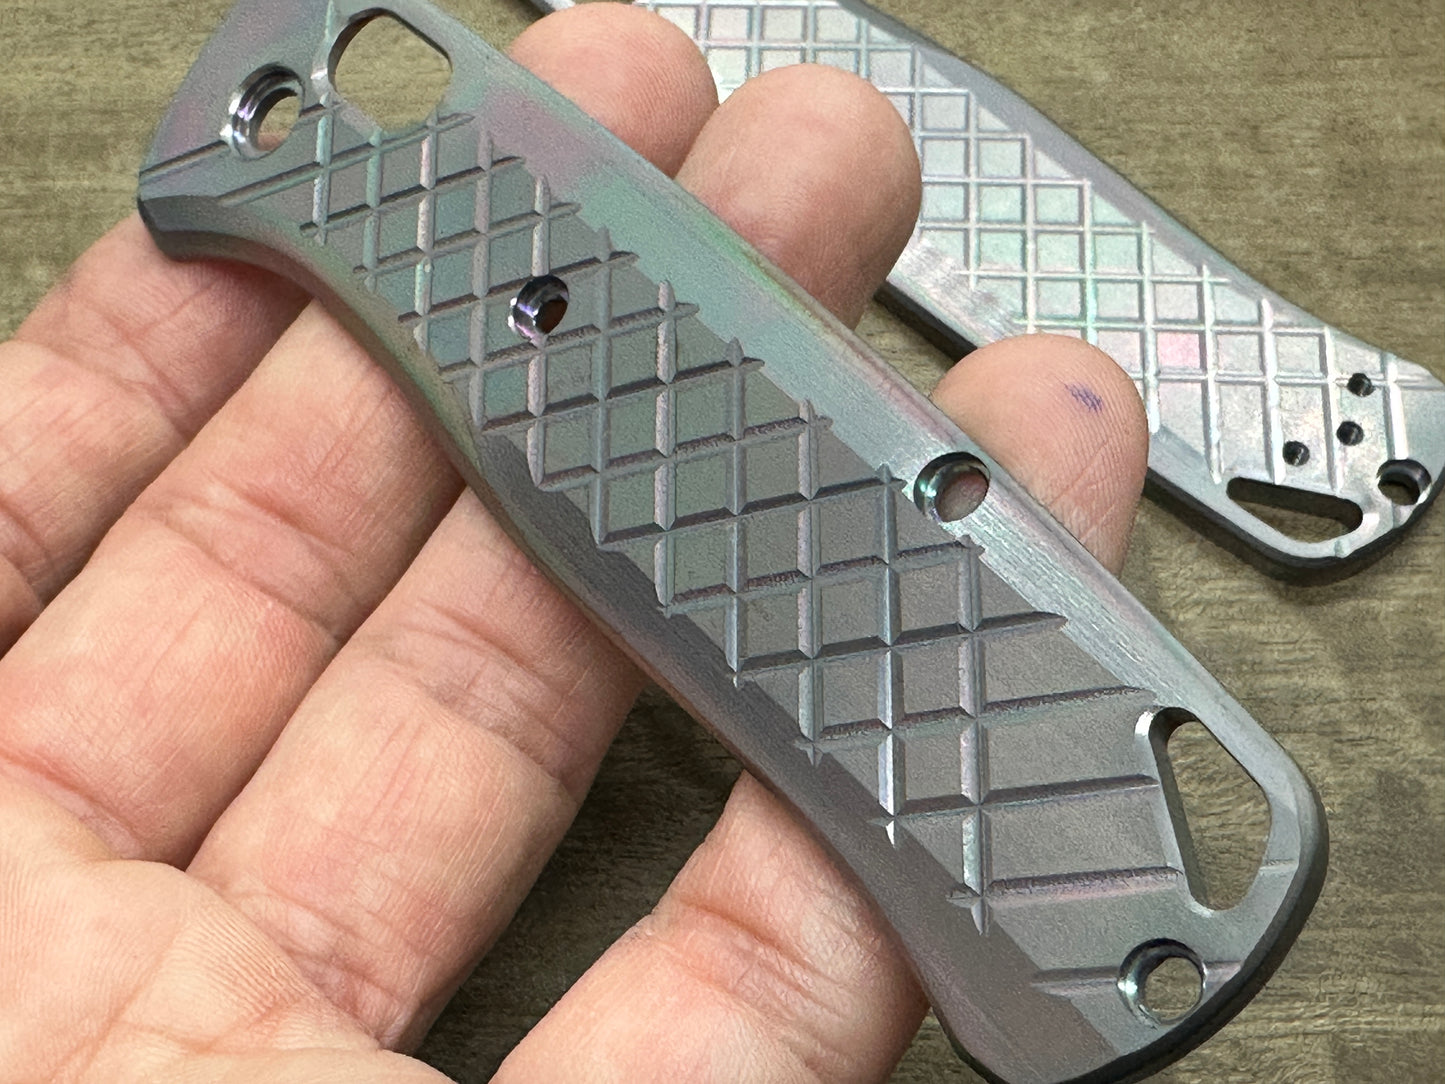 Dark-Ti FRAG Cnc milled Titanium Scales for Benchmade Bugout 535